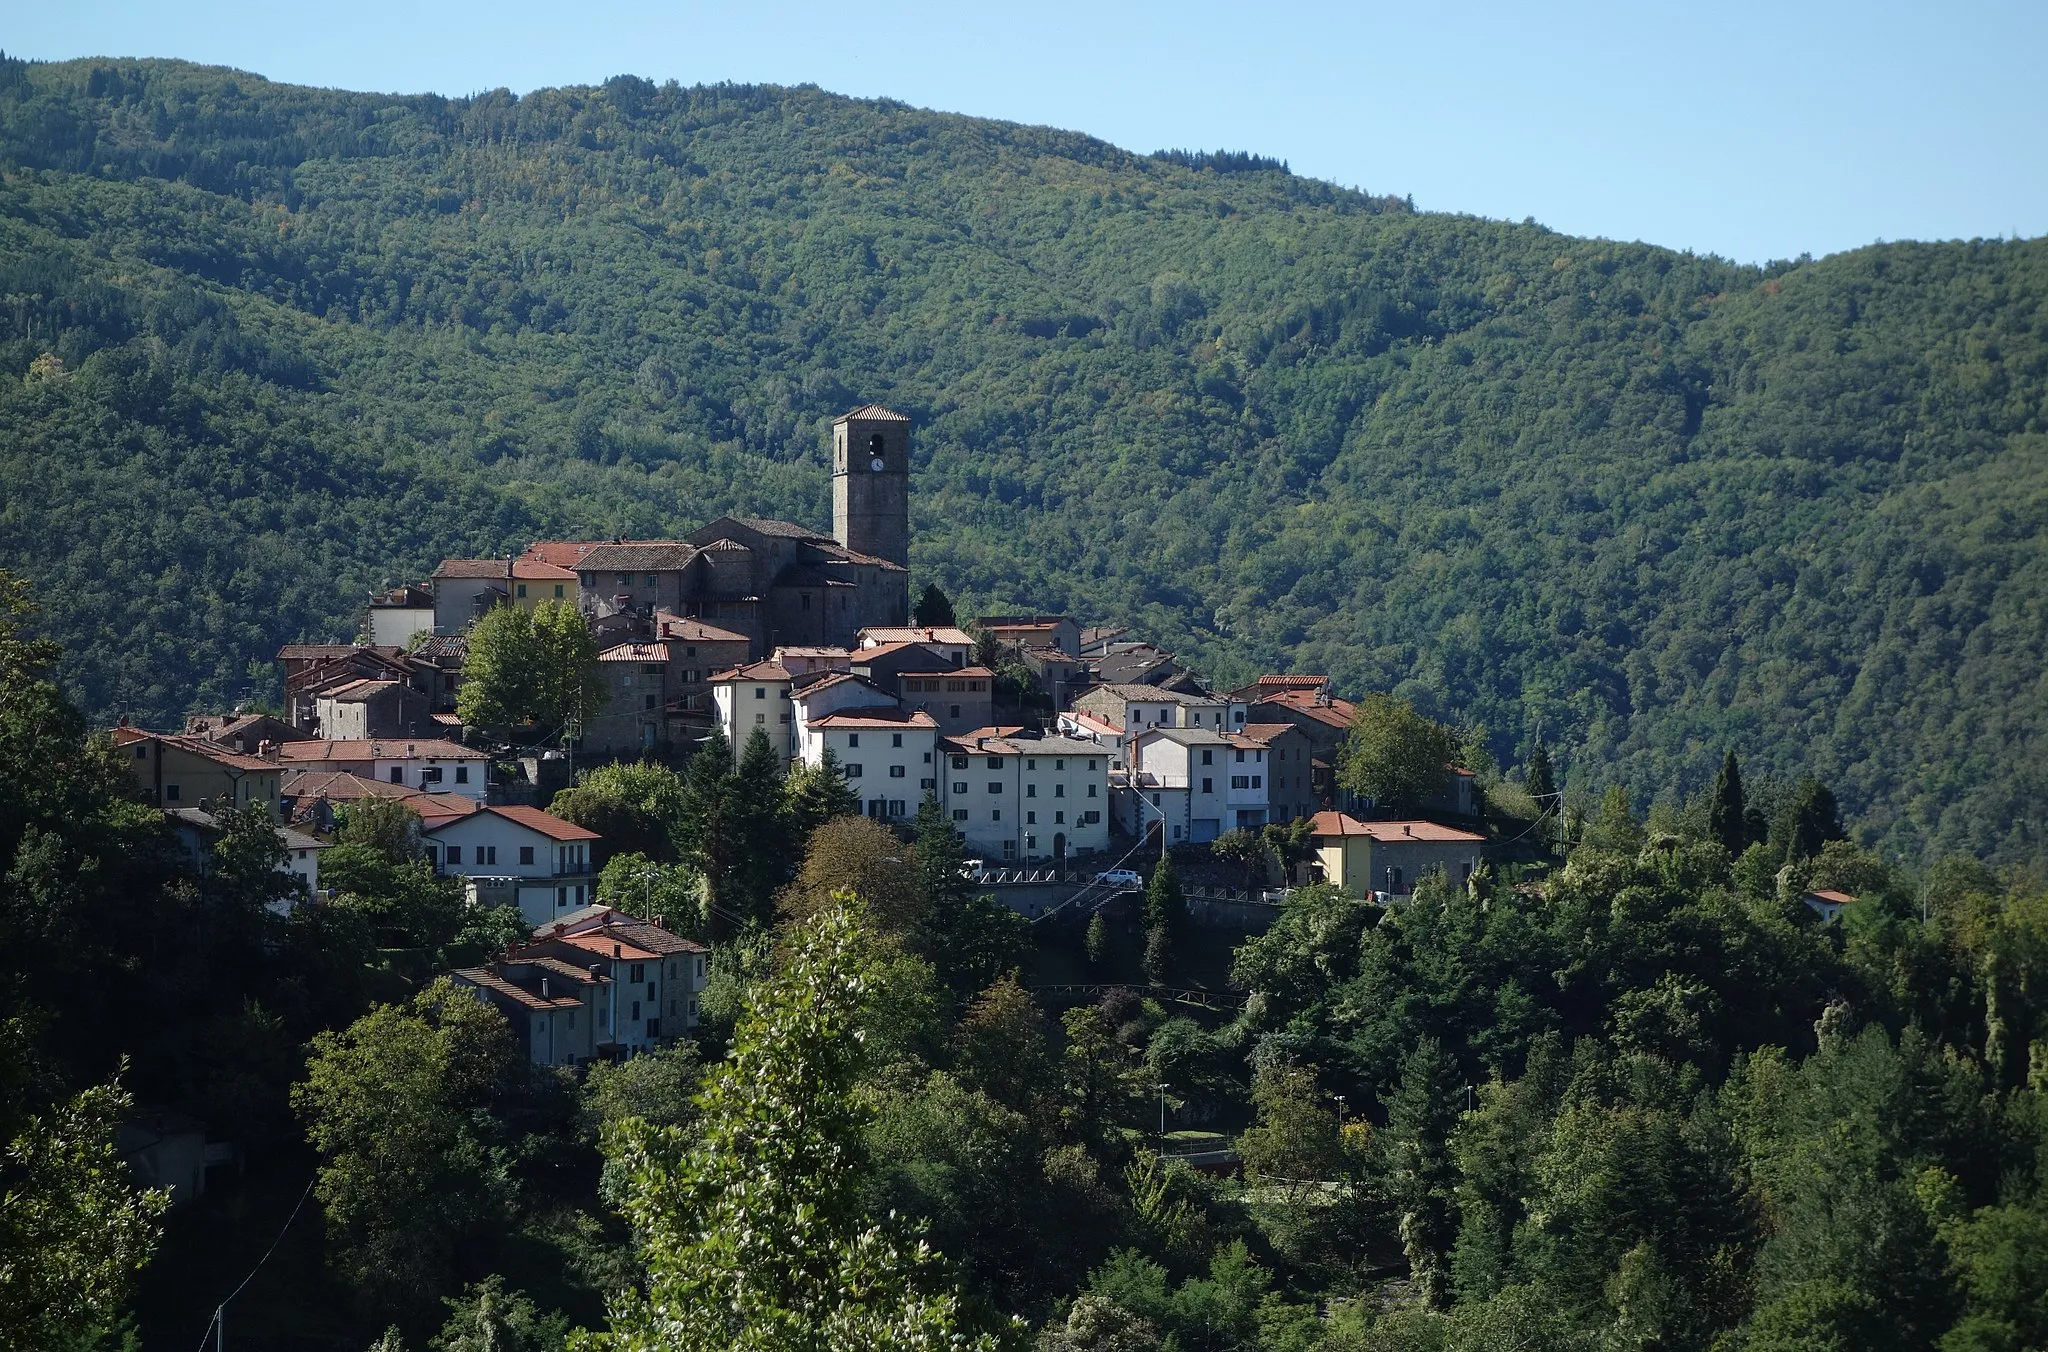 Photo showing: The village of Piteglio, part of the town of San Marcello Piteglio, in Tuscany, Italy.